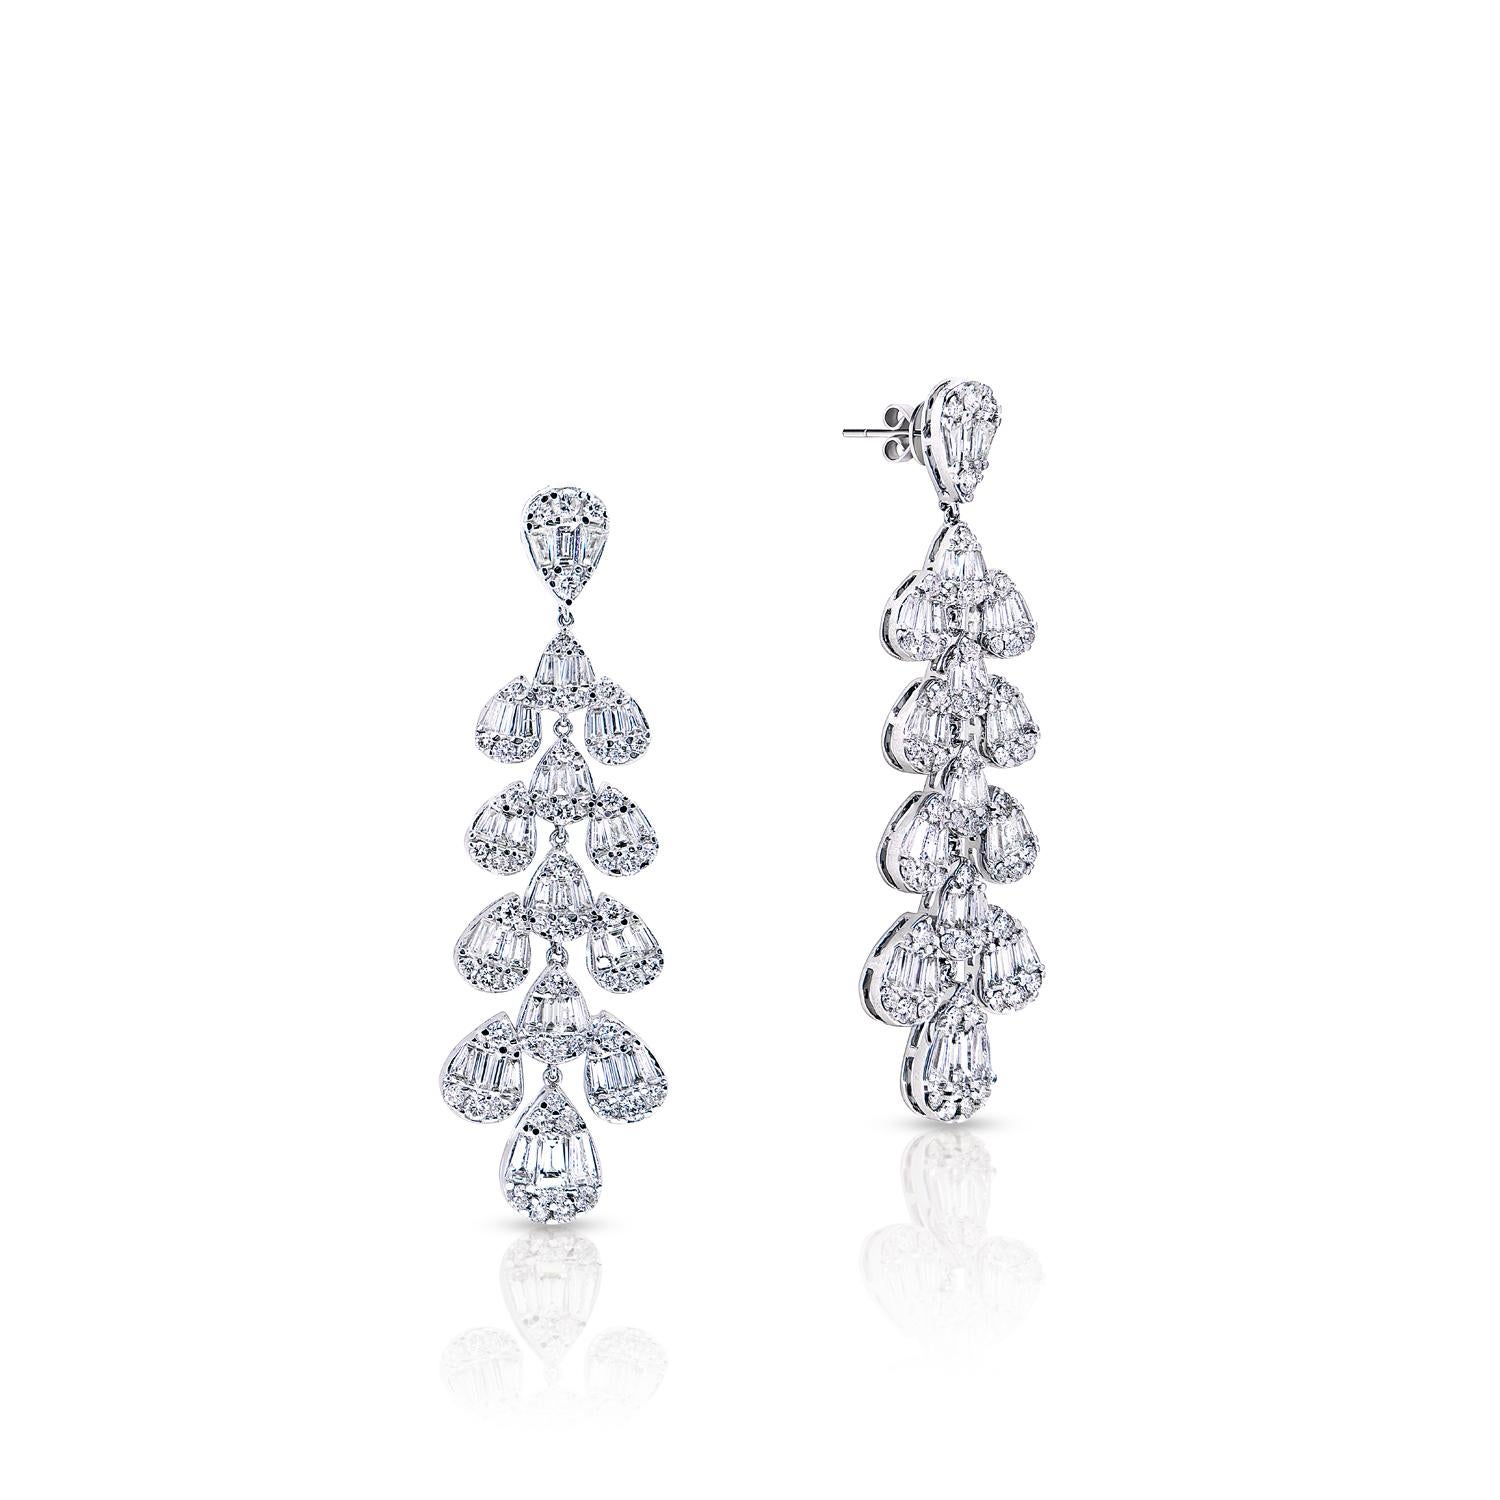 Certified earth-mined Diamond Earrings feature gorgeous 5.96-carat stones in beautiful 14-karat white gold. These dazzling earrings combine mixed shapes and intricate detailing to create an eye-catching, luxurious look that is sure to turn heads.